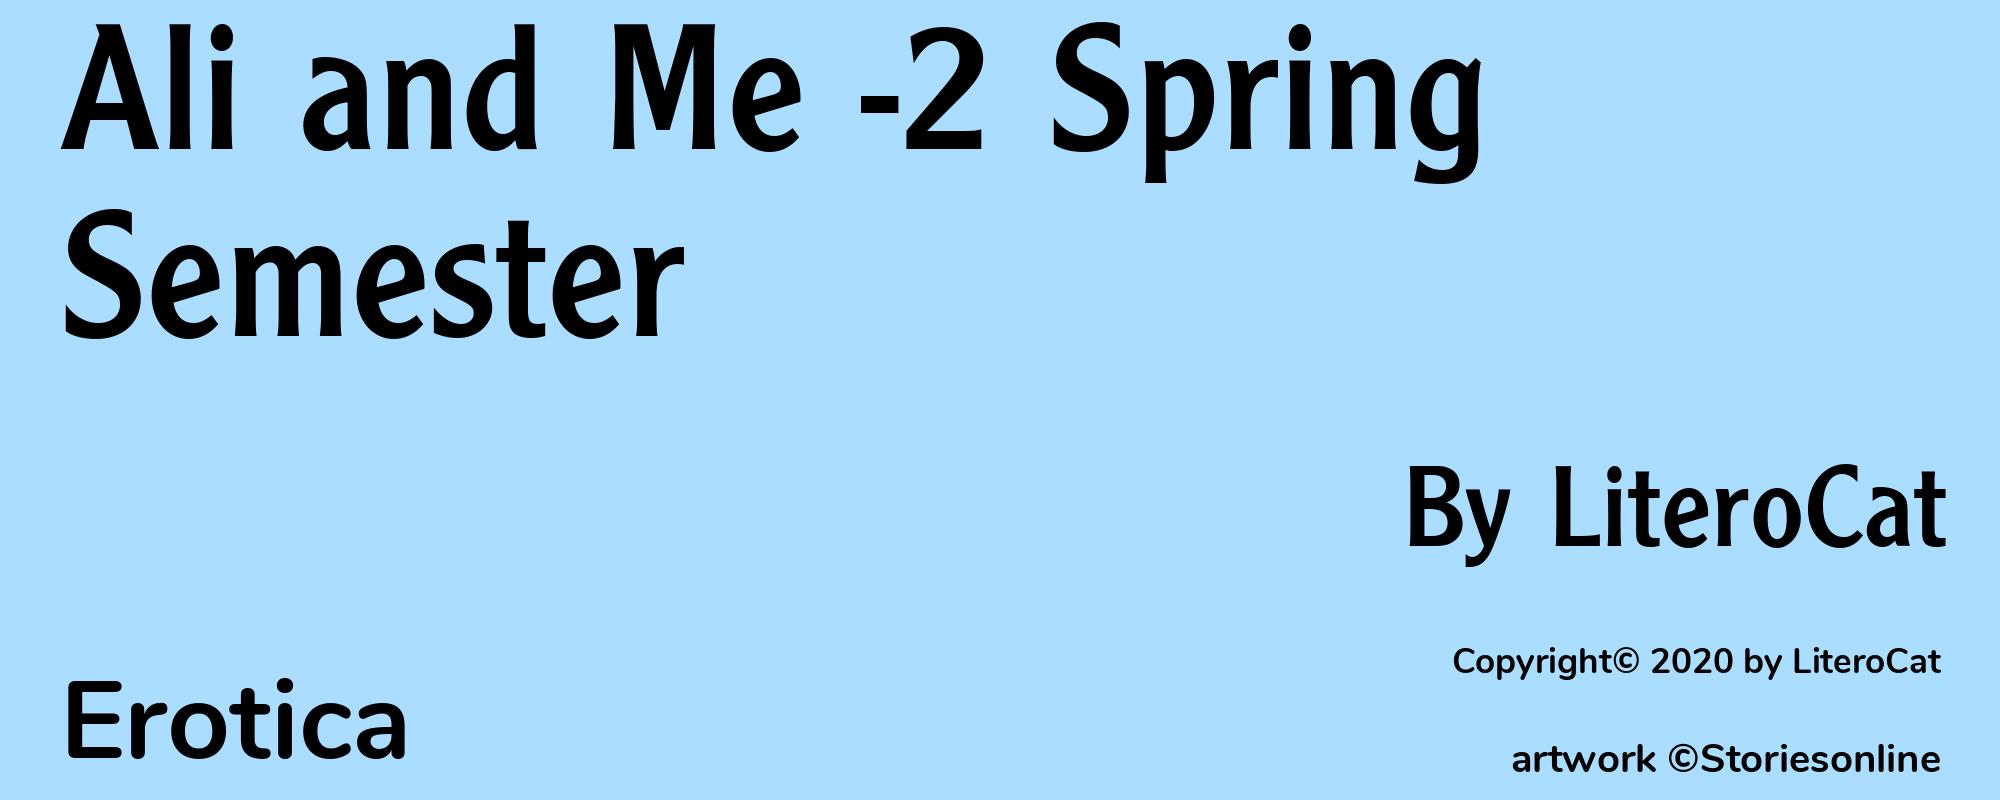 Ali and Me -2 Spring Semester - Cover